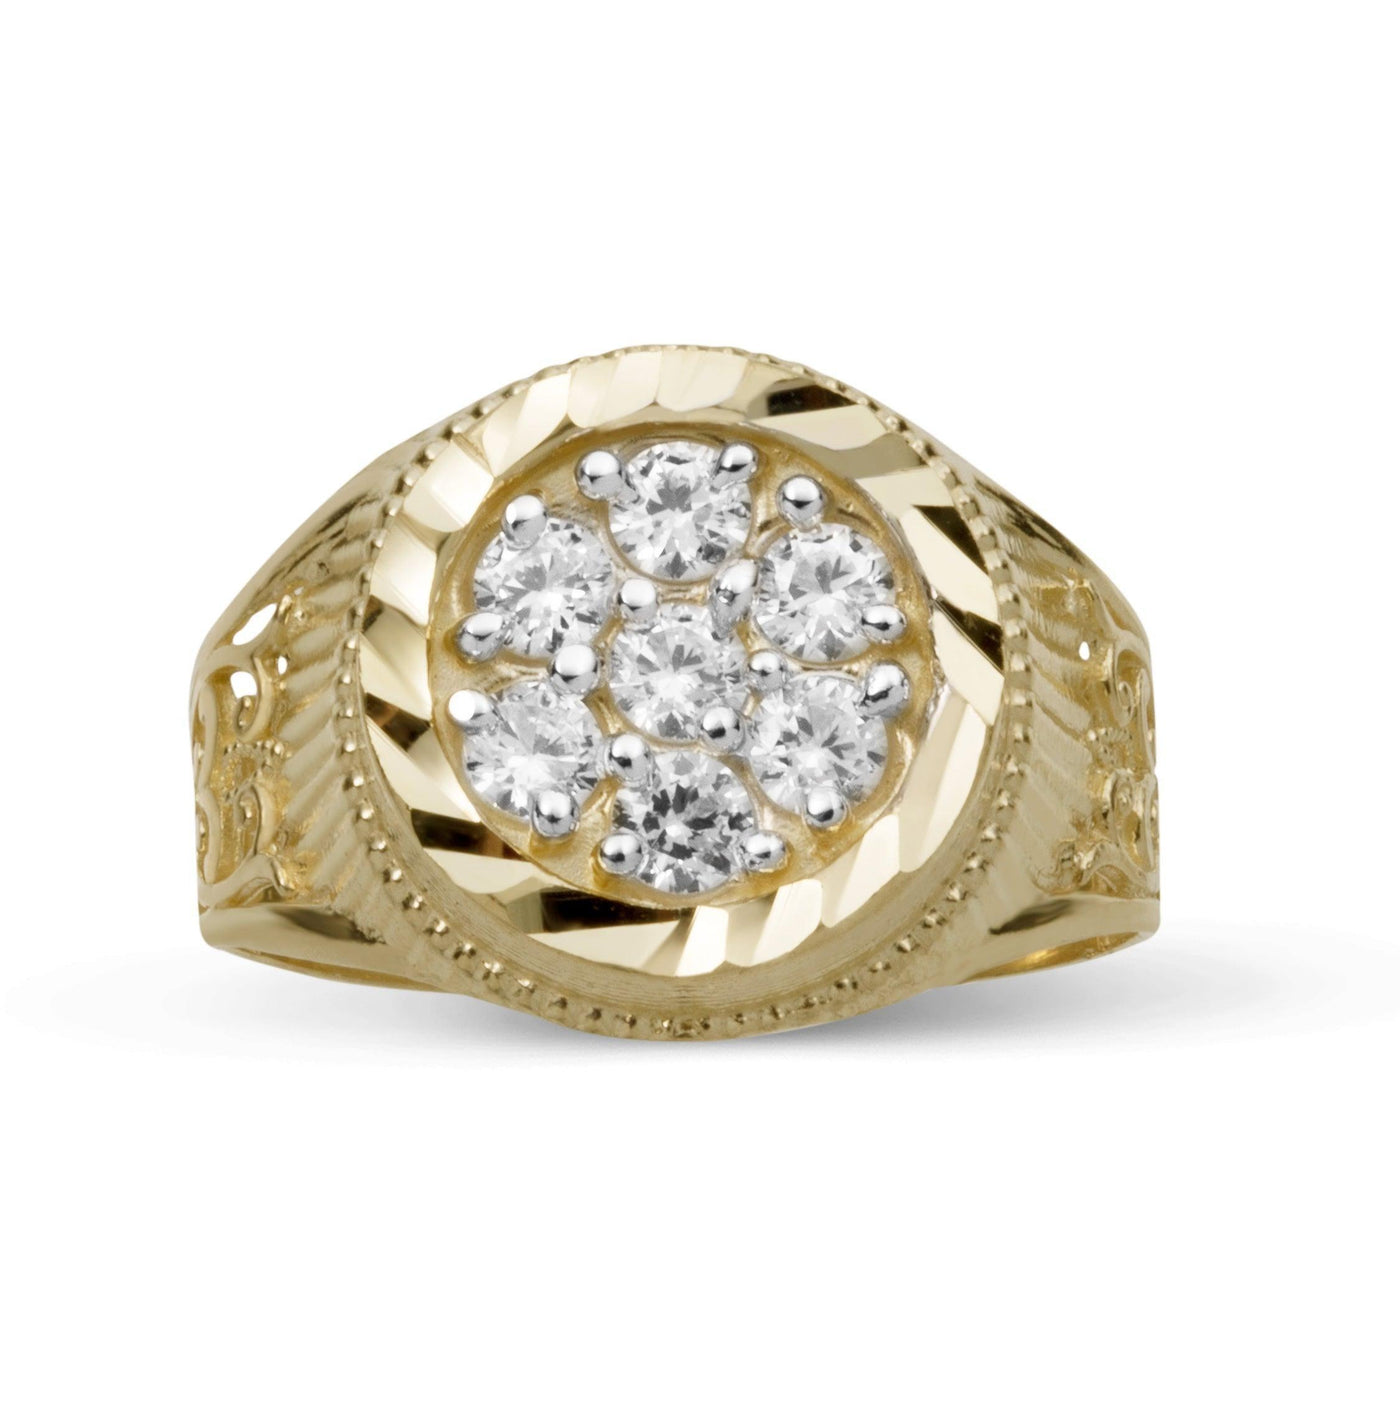 Textured Round CZ Signet Ring Solid 10K Yellow Gold - bayamjewelry